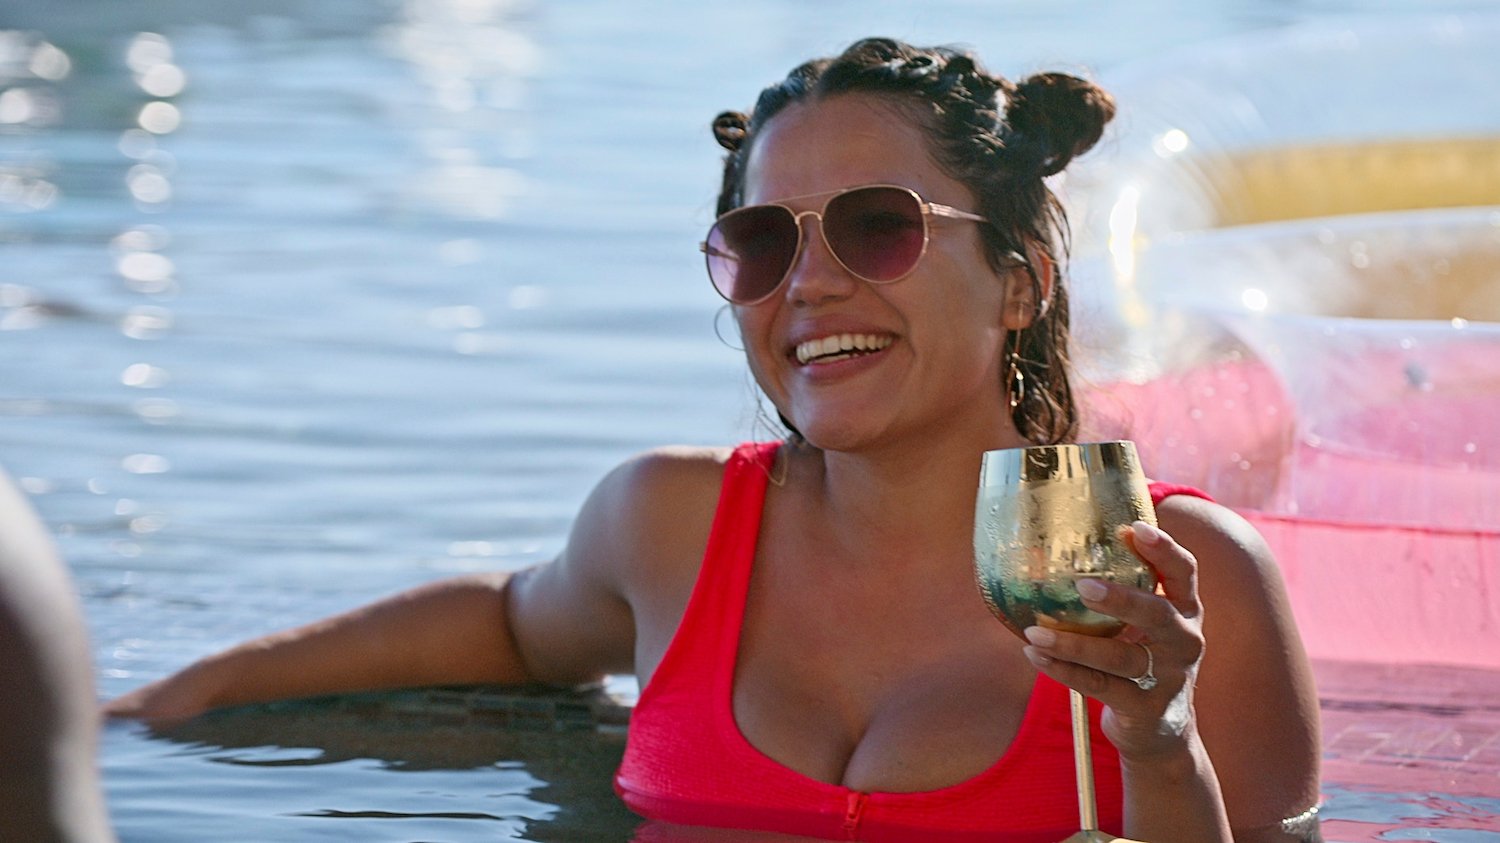 'Love Is Blind' star Nancy holds a cup while swimming in a pool. Nancy rejected Andrew in the pods and he faked tears to seem sad.